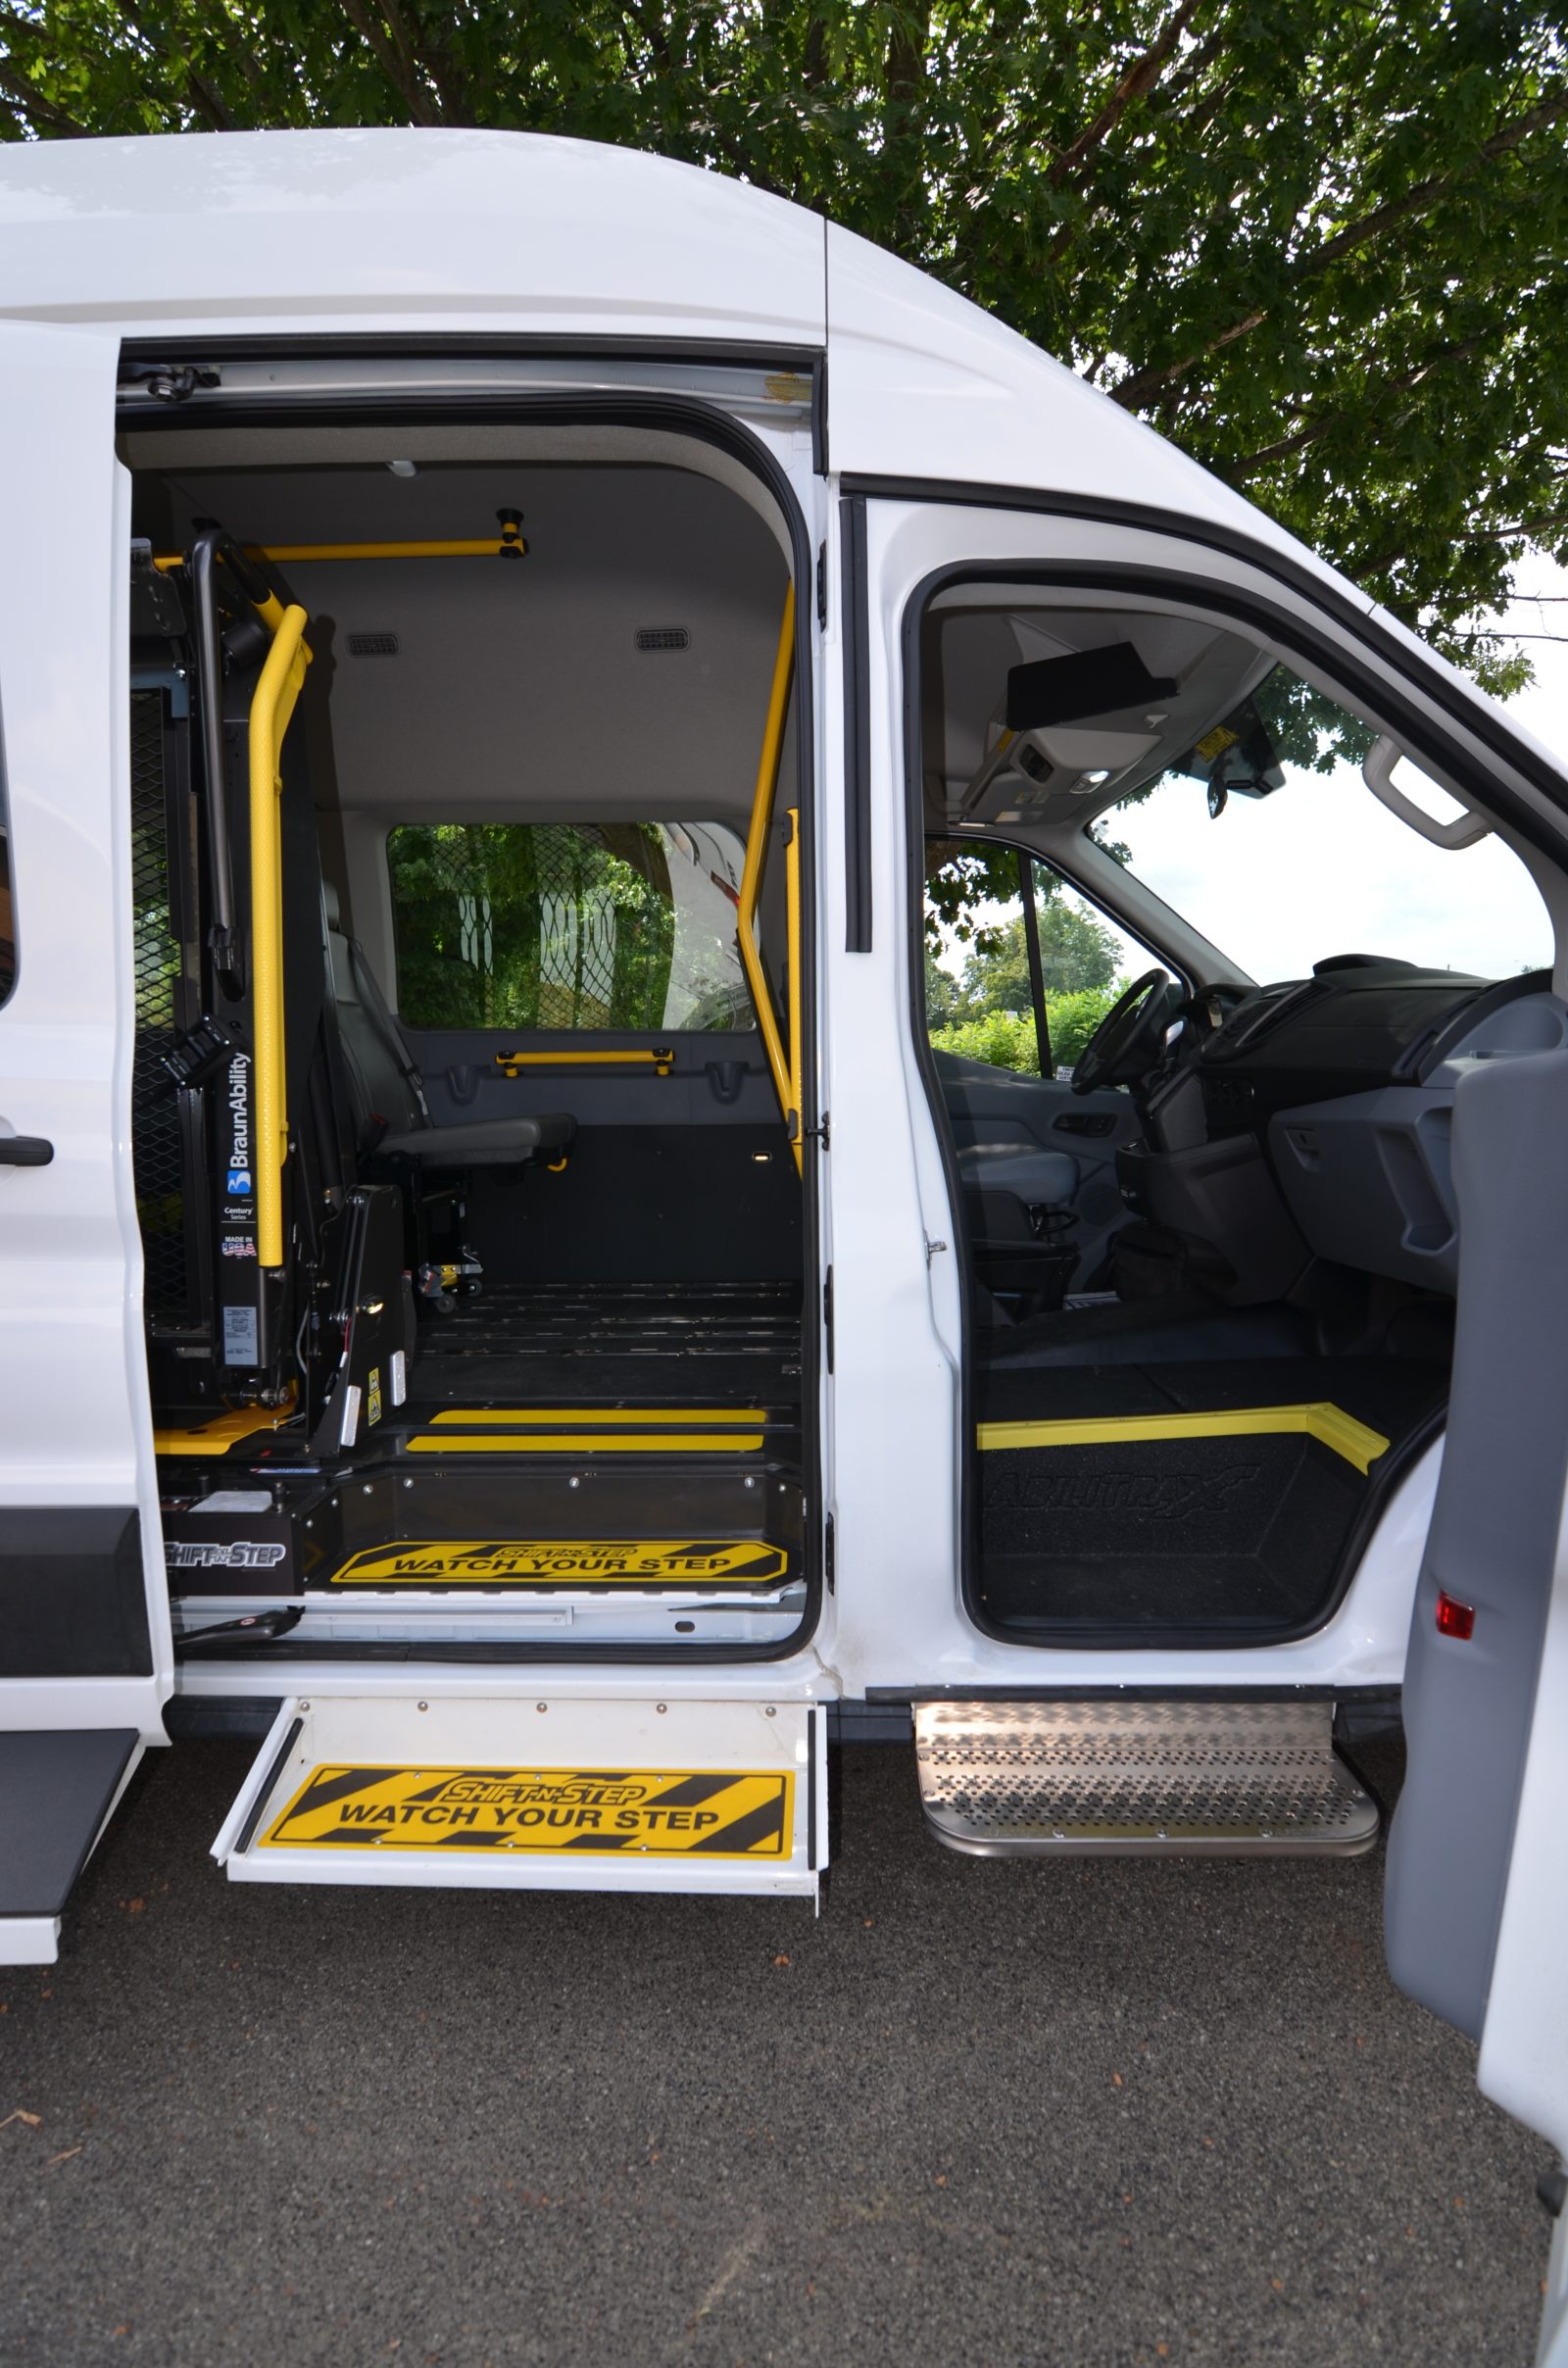 Operator EntryOperator Entry System allows the operator quick access in and out of the vehicle to assist with on boarding and off boarding as needed System allow the operator quick access in and out of the vehicle to assist with on boarding and off boarding as needed